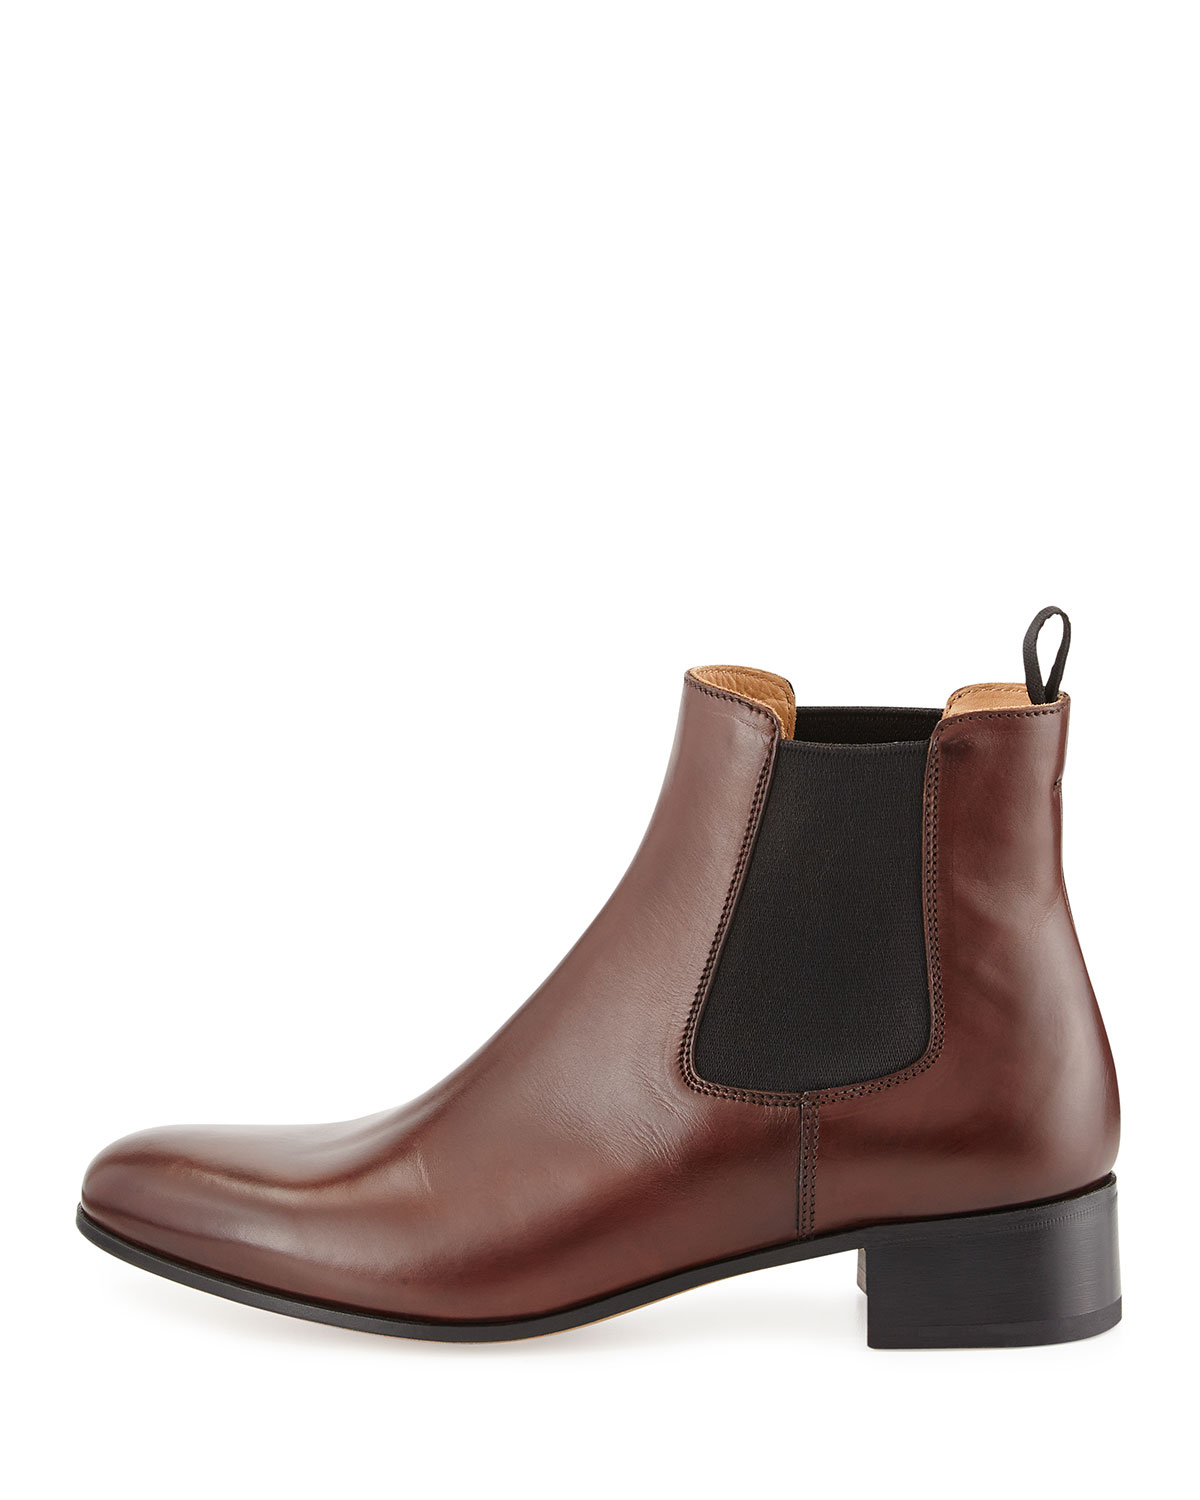 Prada Leather Chelsea Boot in Brown | Lyst